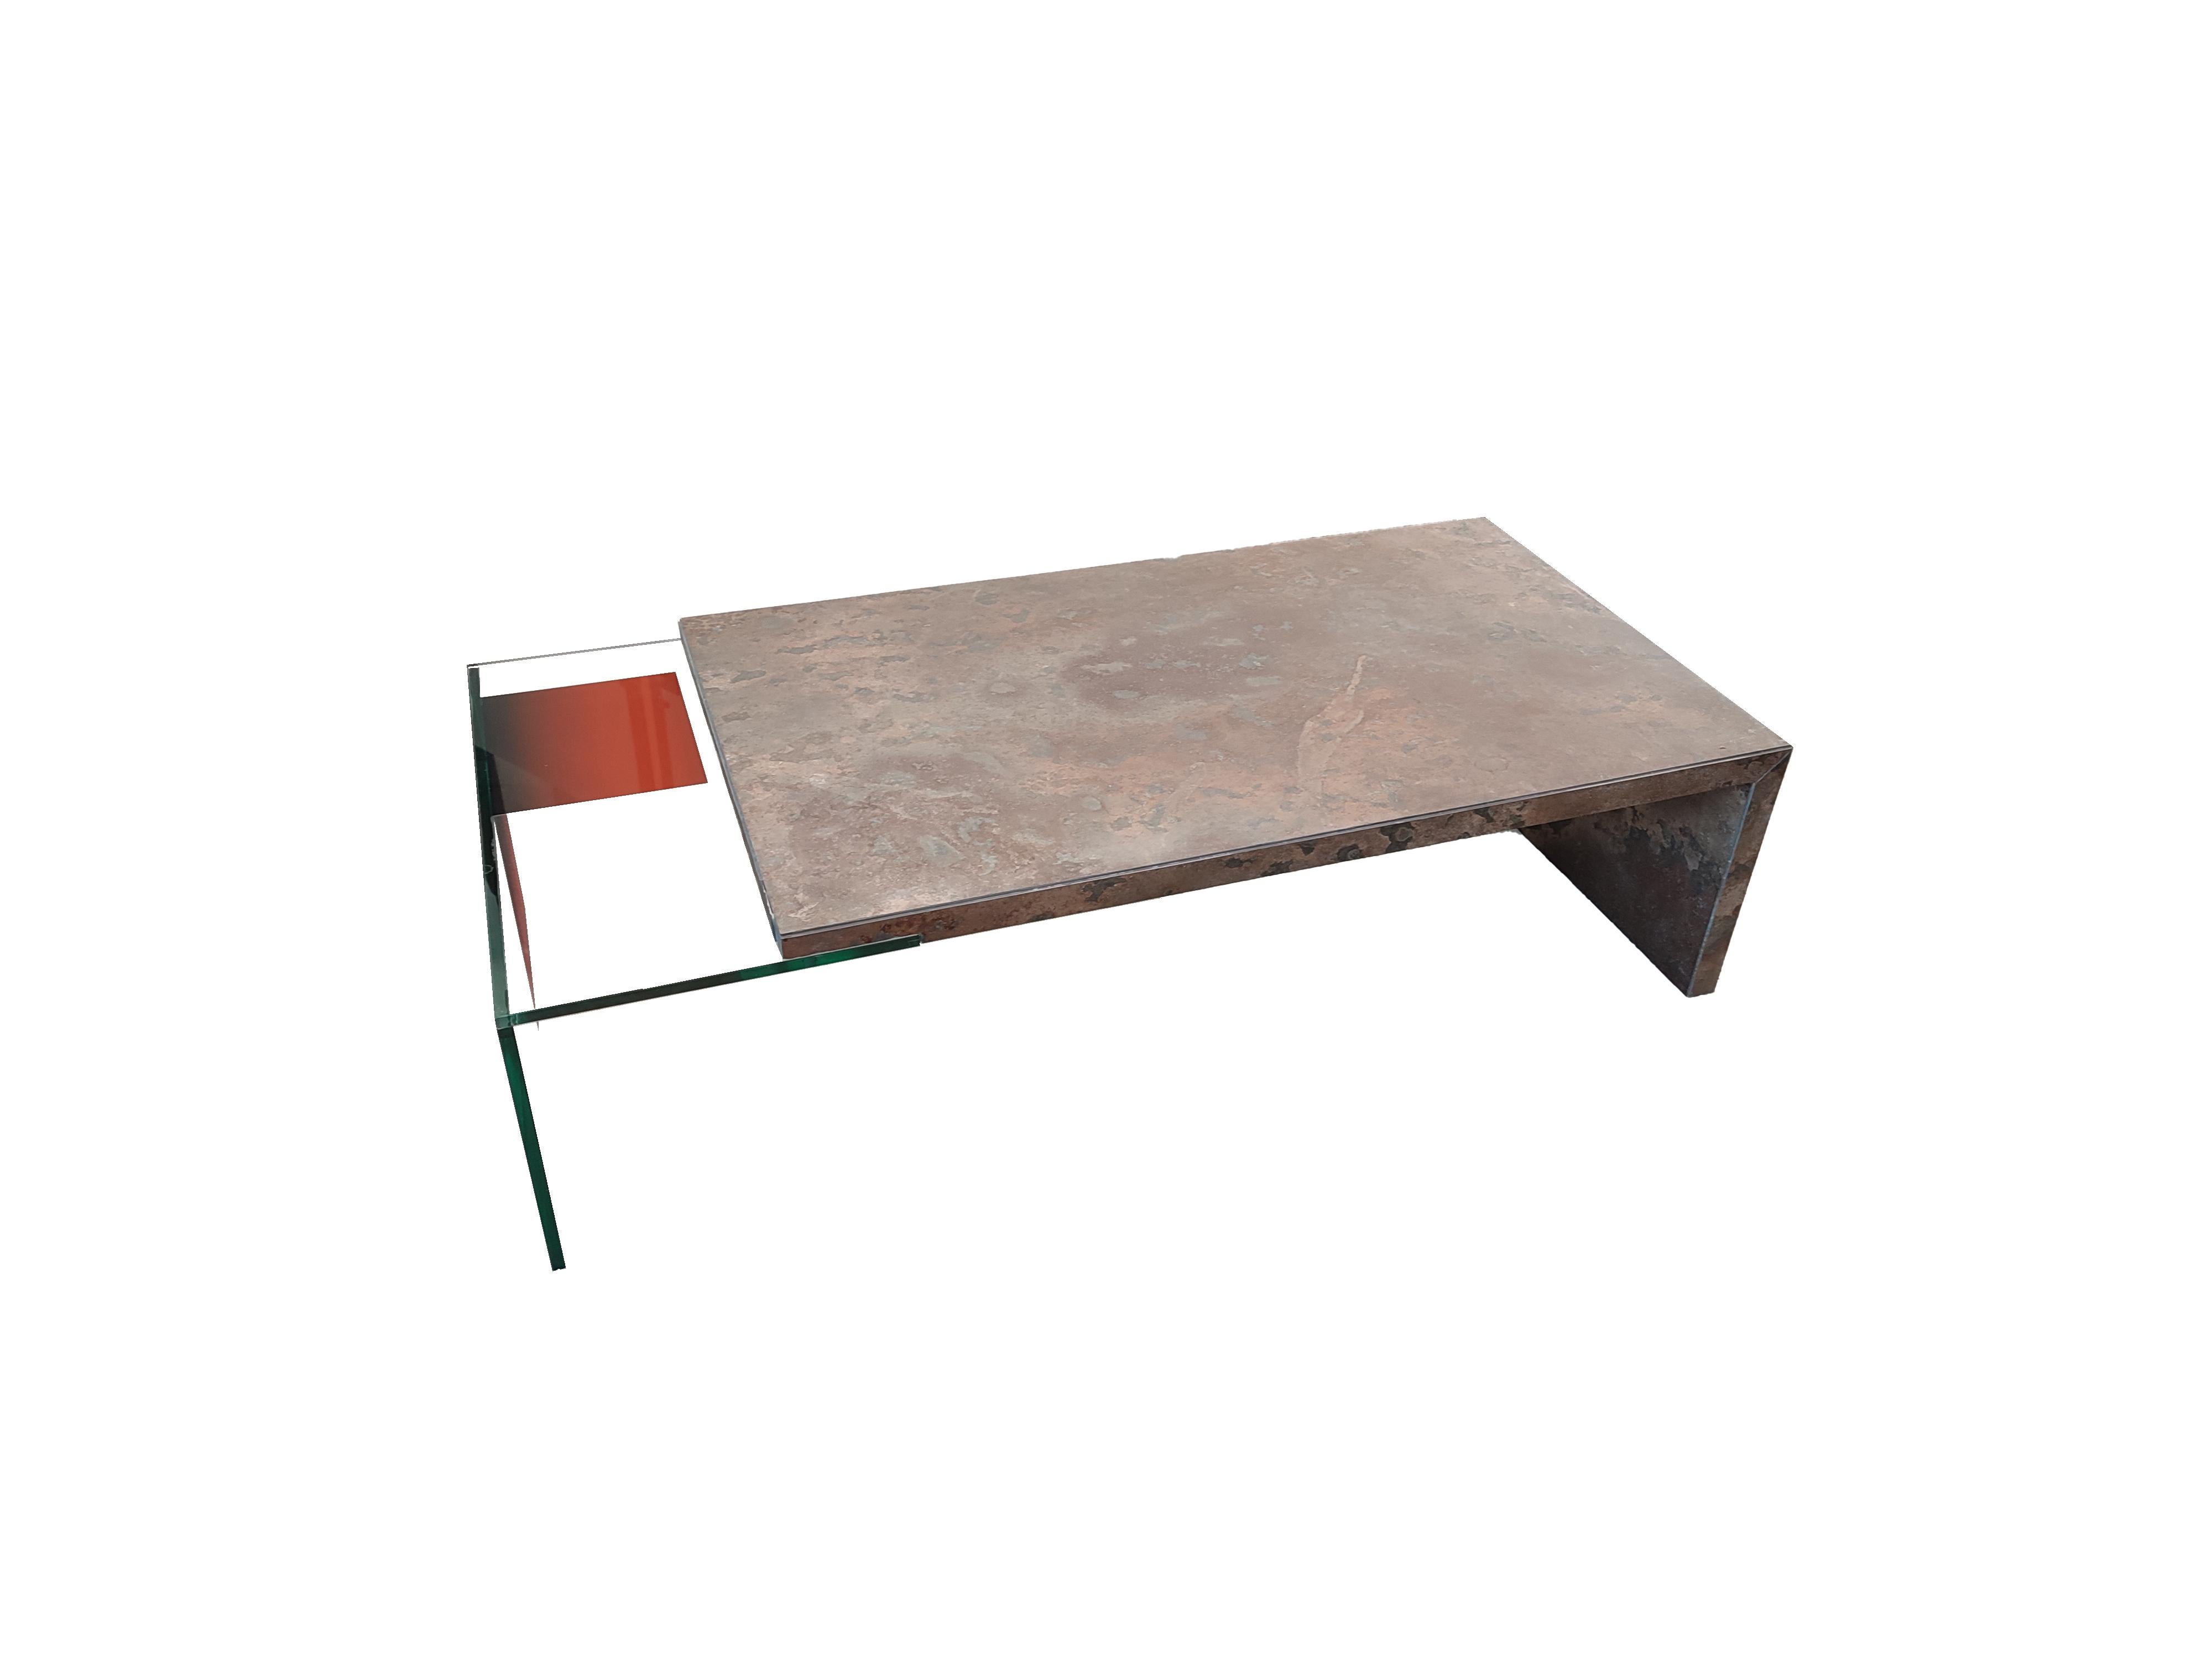 Spanish Joano Coffee Marble Design Table Unique Piece Contemporary Artist Spain Meddel For Sale